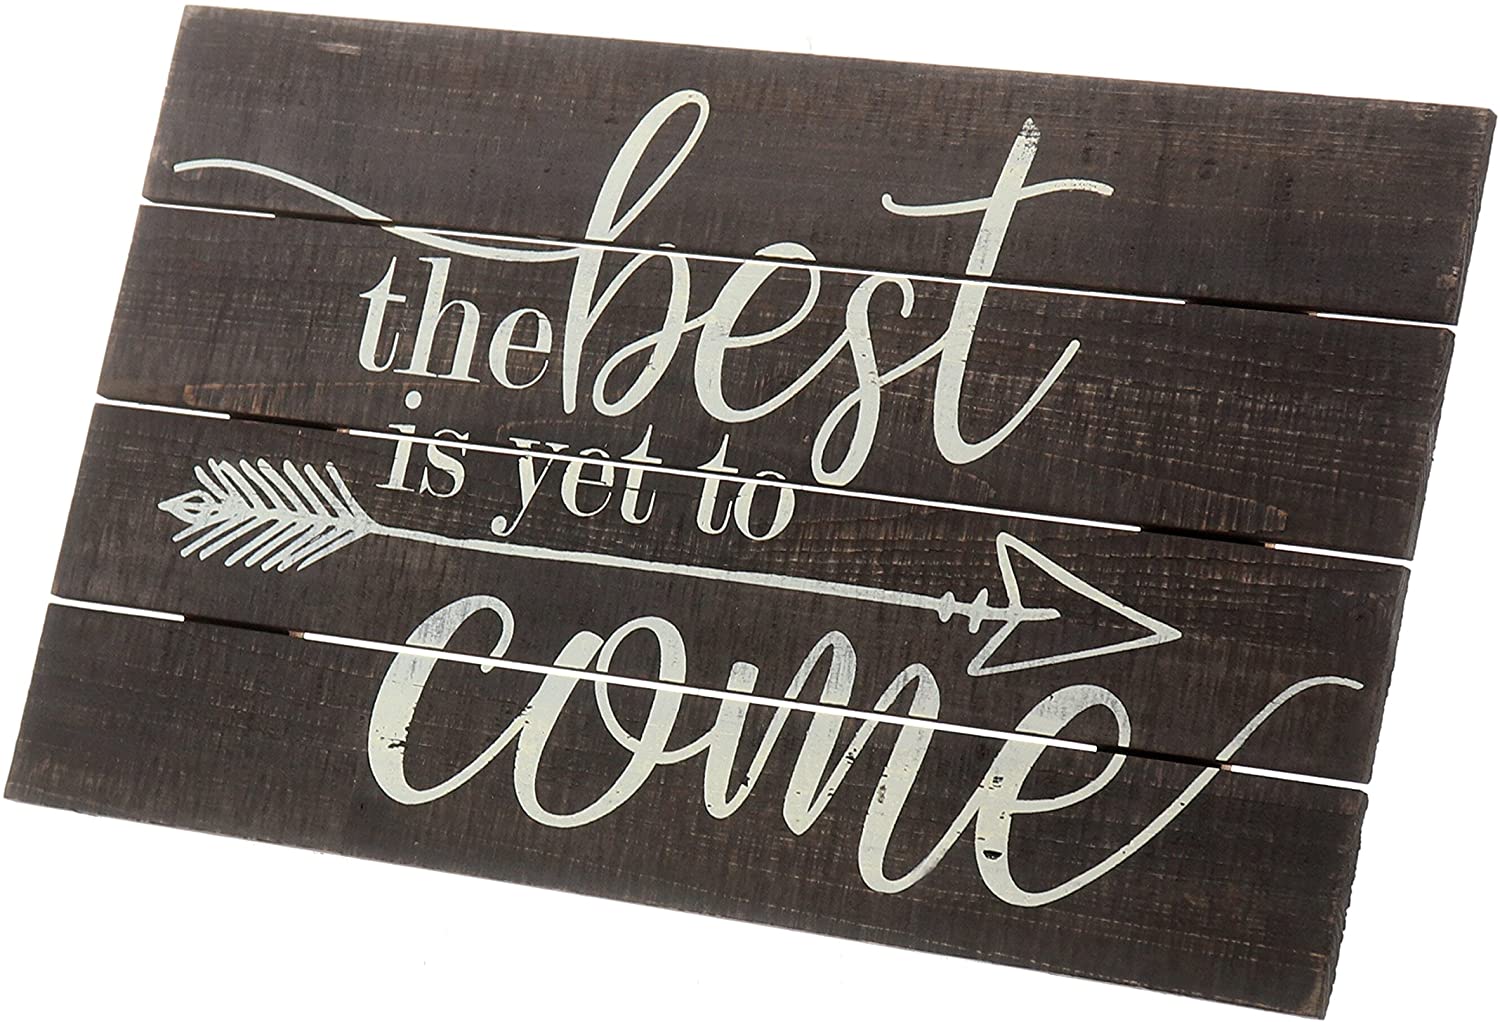 The Best Is Yet To Come Rustic Wood Hanging Sign Decorative Wall Decor